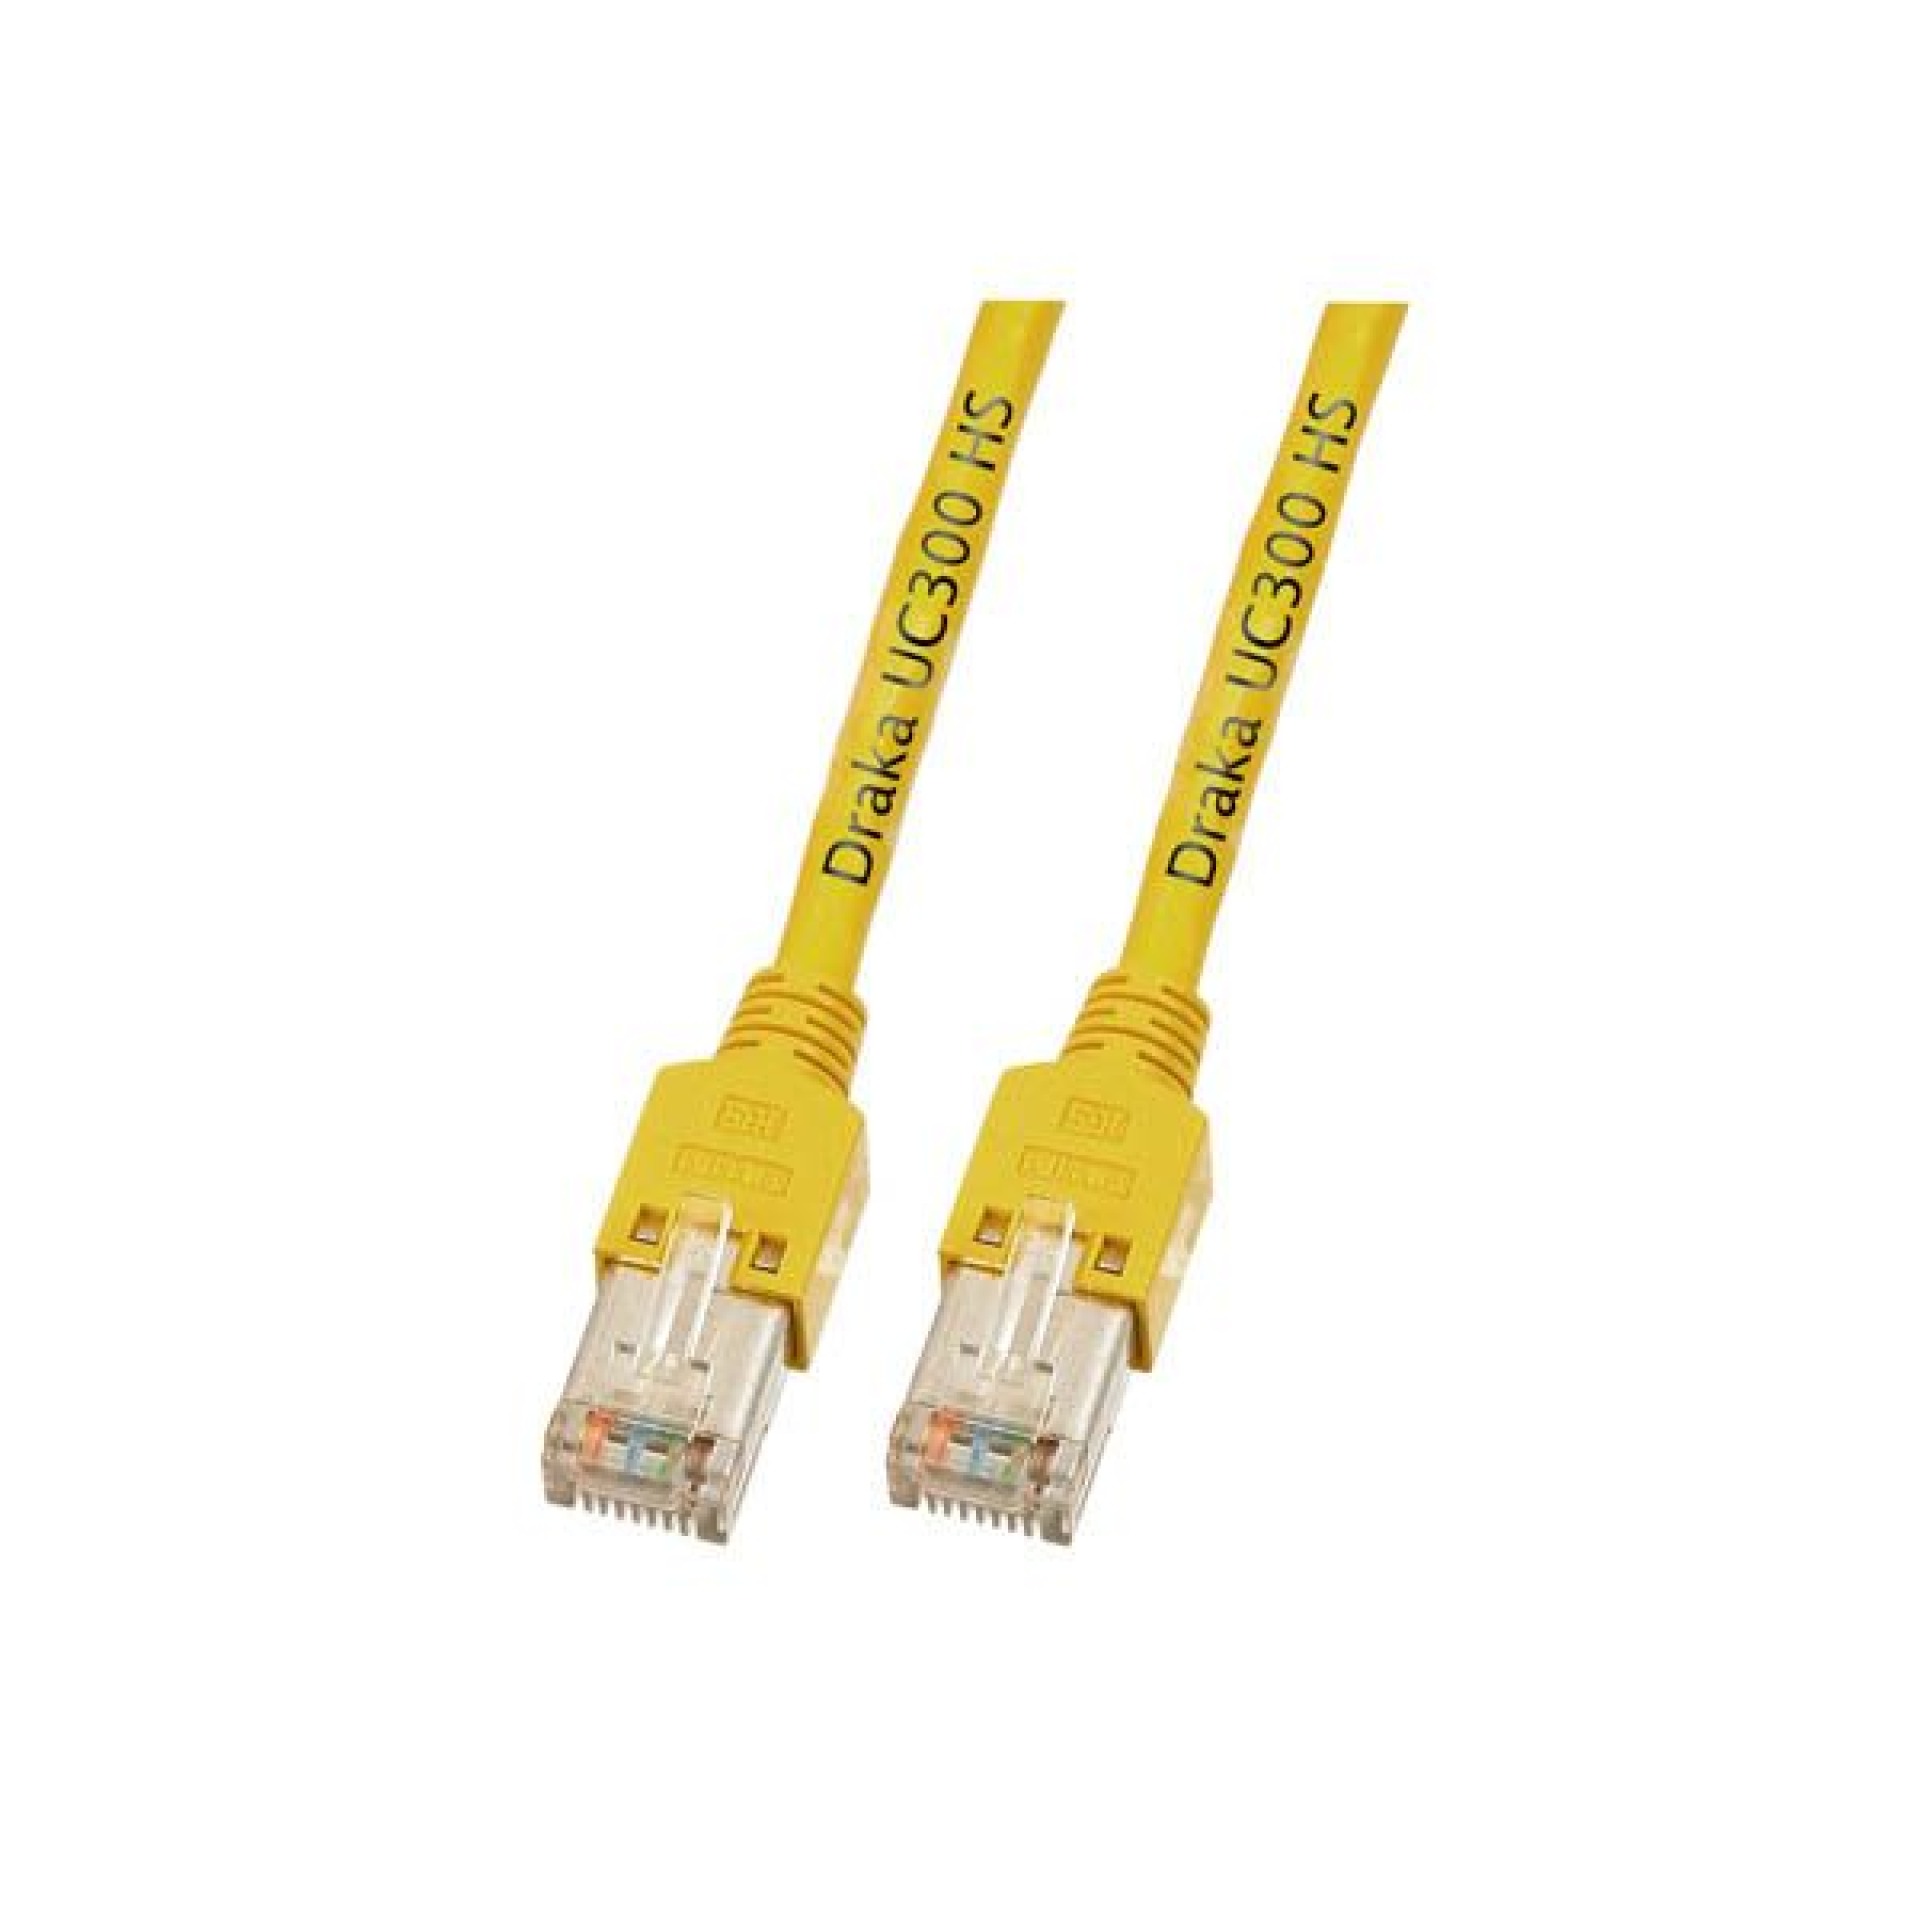 RJ45 Patch cable SF/UTP, Cat.5e, TM11, UC300, 3m, yellow